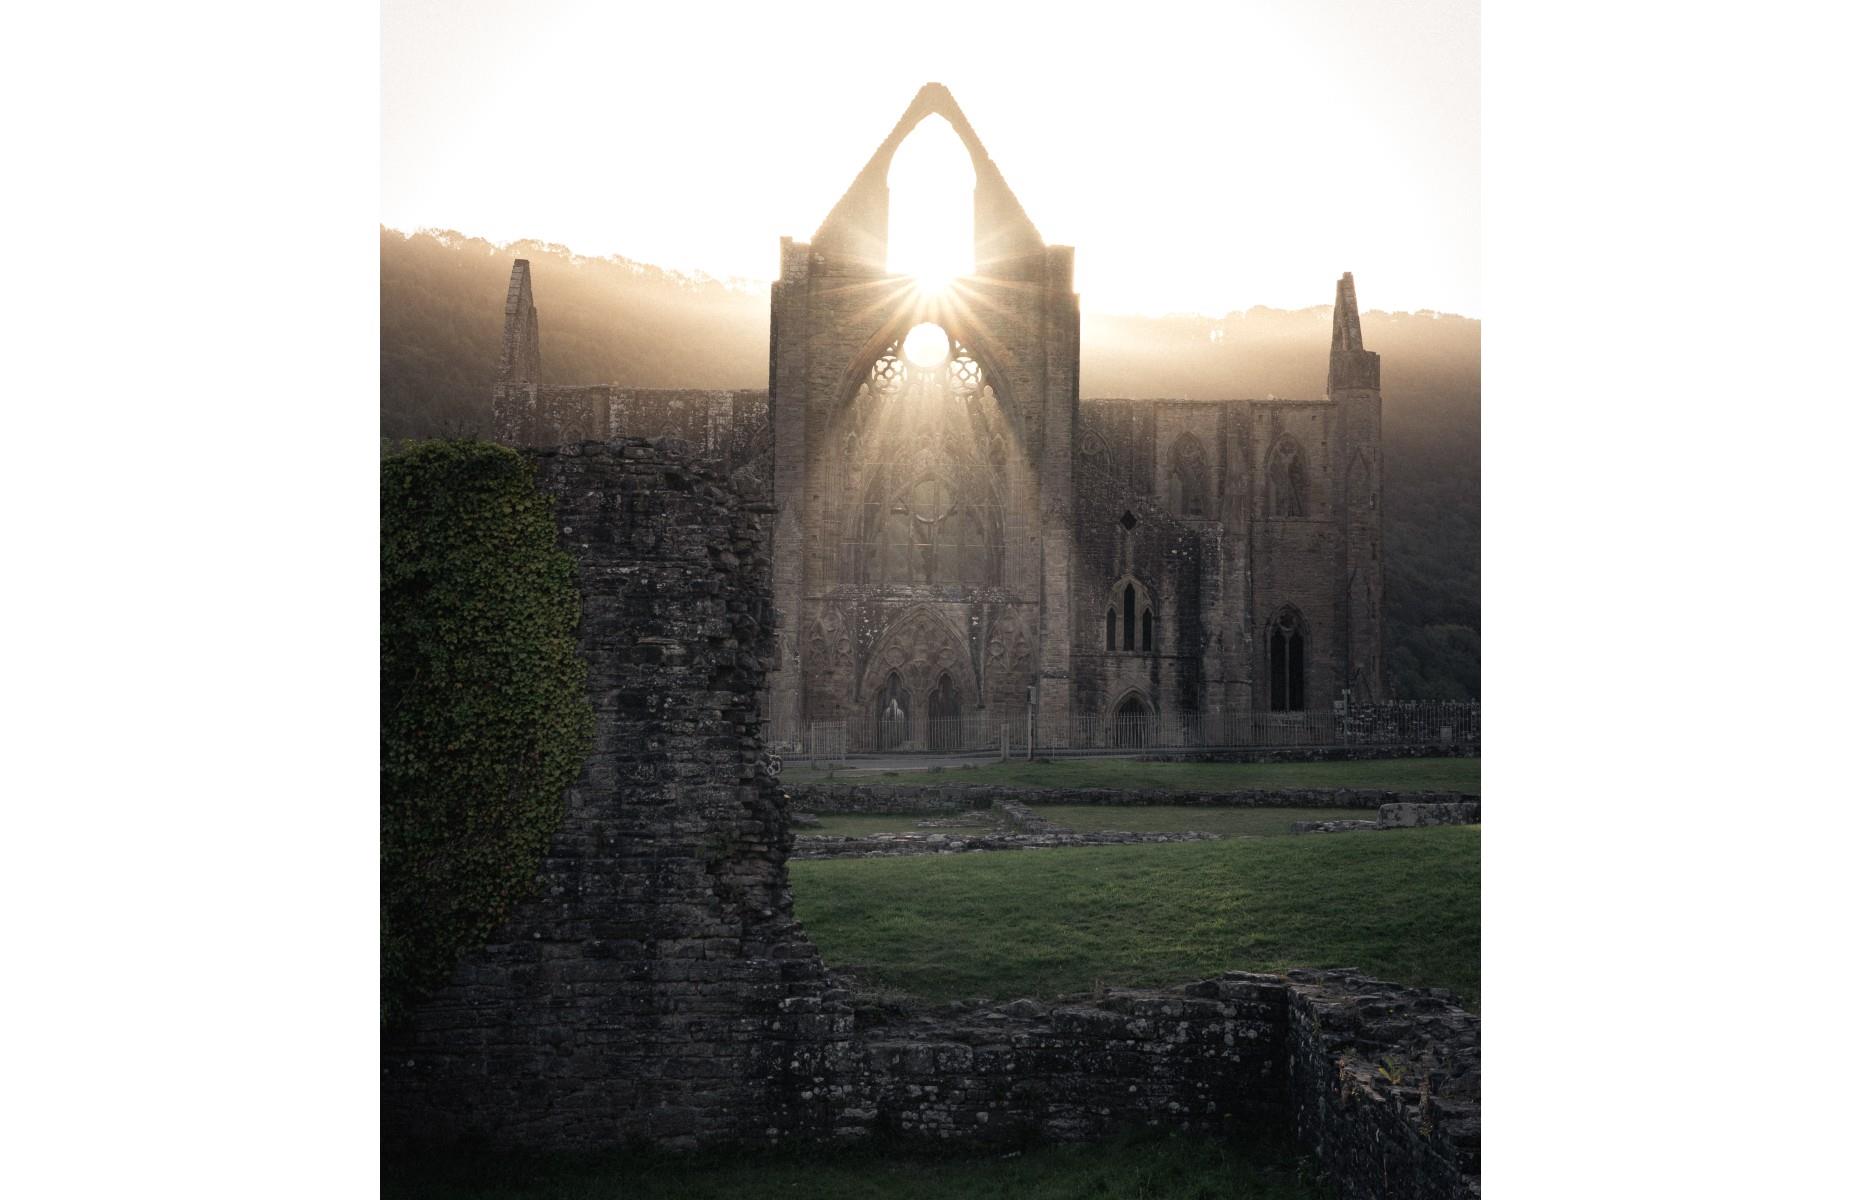 Situated on the Welsh side of the River Wye, Tintern Abbey was originally founded in 1131 by Cistercian monks, but the majestic Gothic architecture we see here today was created in the late 13th century. Sam Binding, who captured the photograph, said: "As I arrived, the sun had crept over the adjacent hills, spreading rays through the central section of the abbey. If you look closely, you may be able to see what looks like a mysterious cloaked figure in the lower section..."